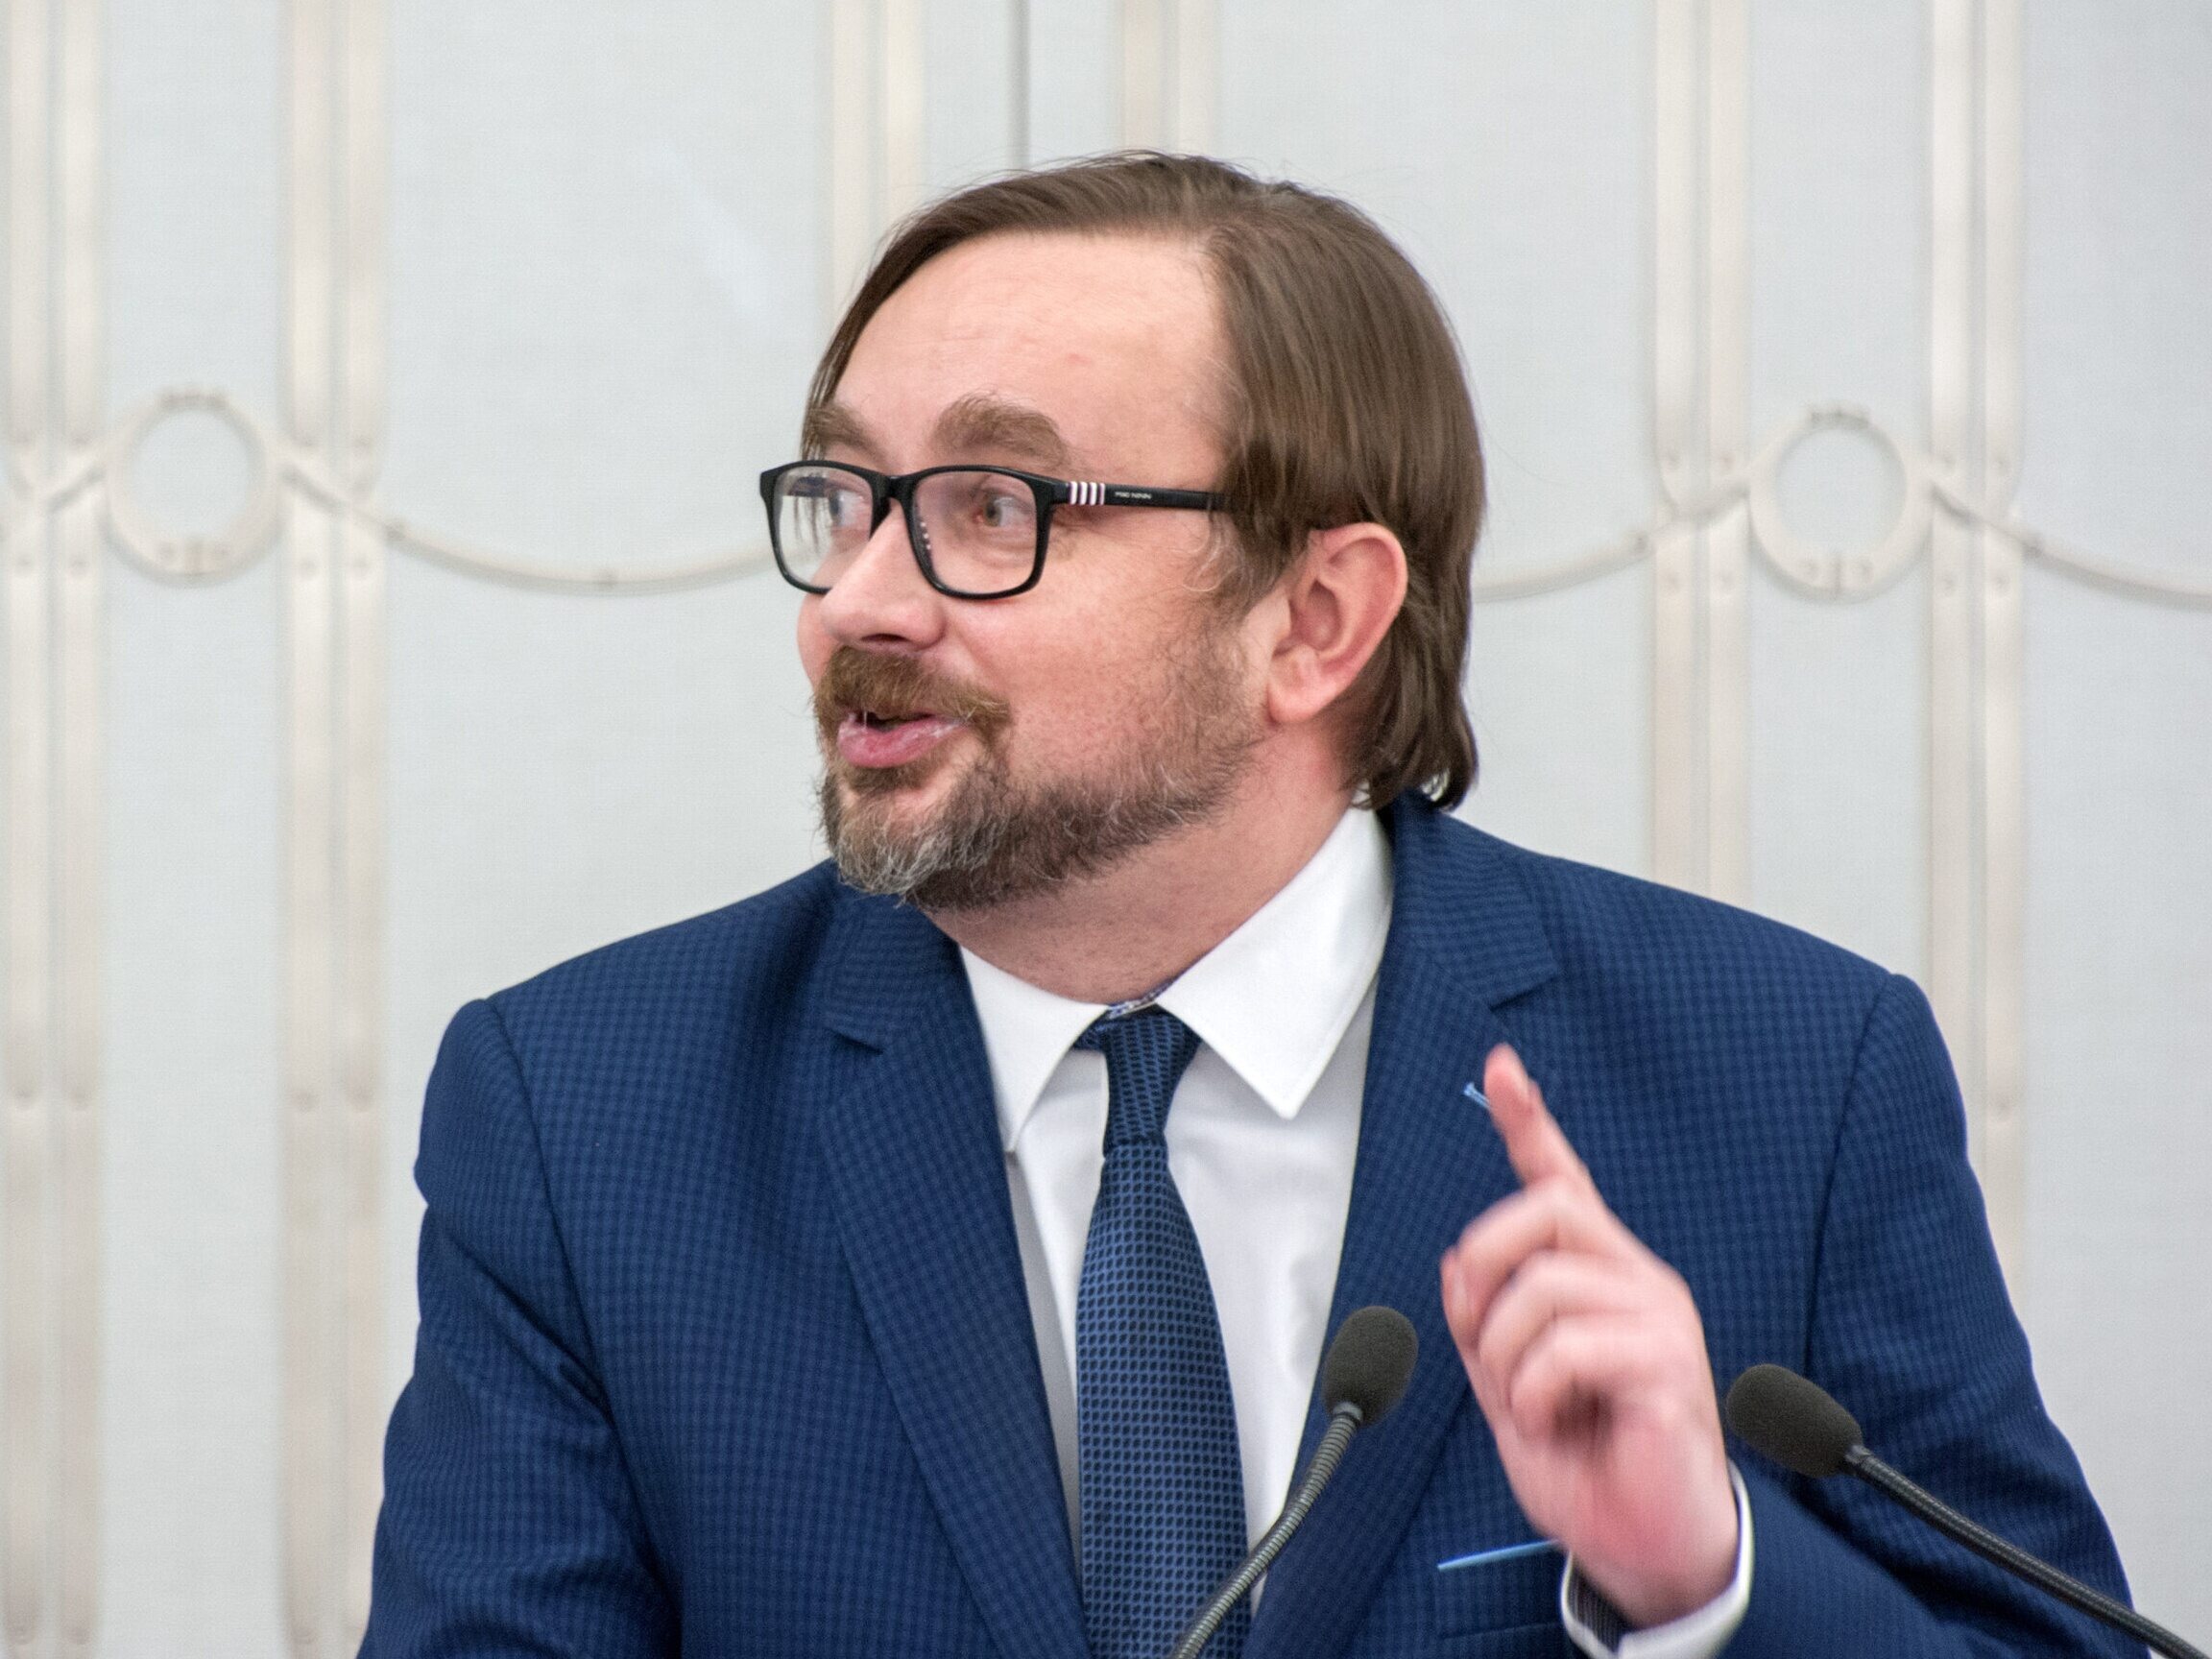 Will the Sejm adopt a resolution after Weber's words?  "External interference should not take place"